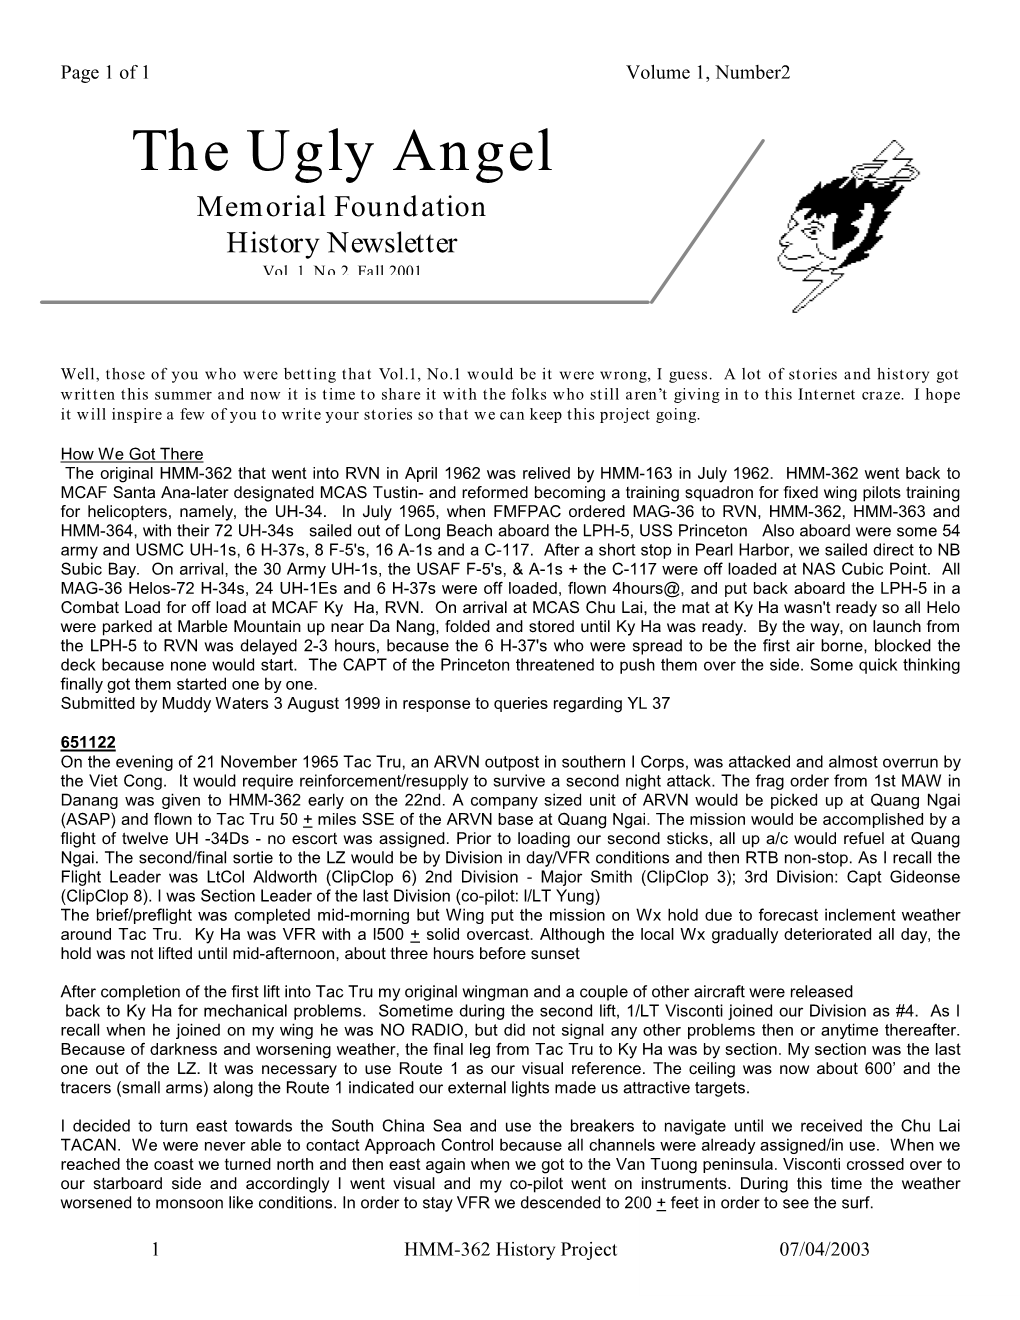 The Ugly Angel Memorial Foundation History Newsletter Vol